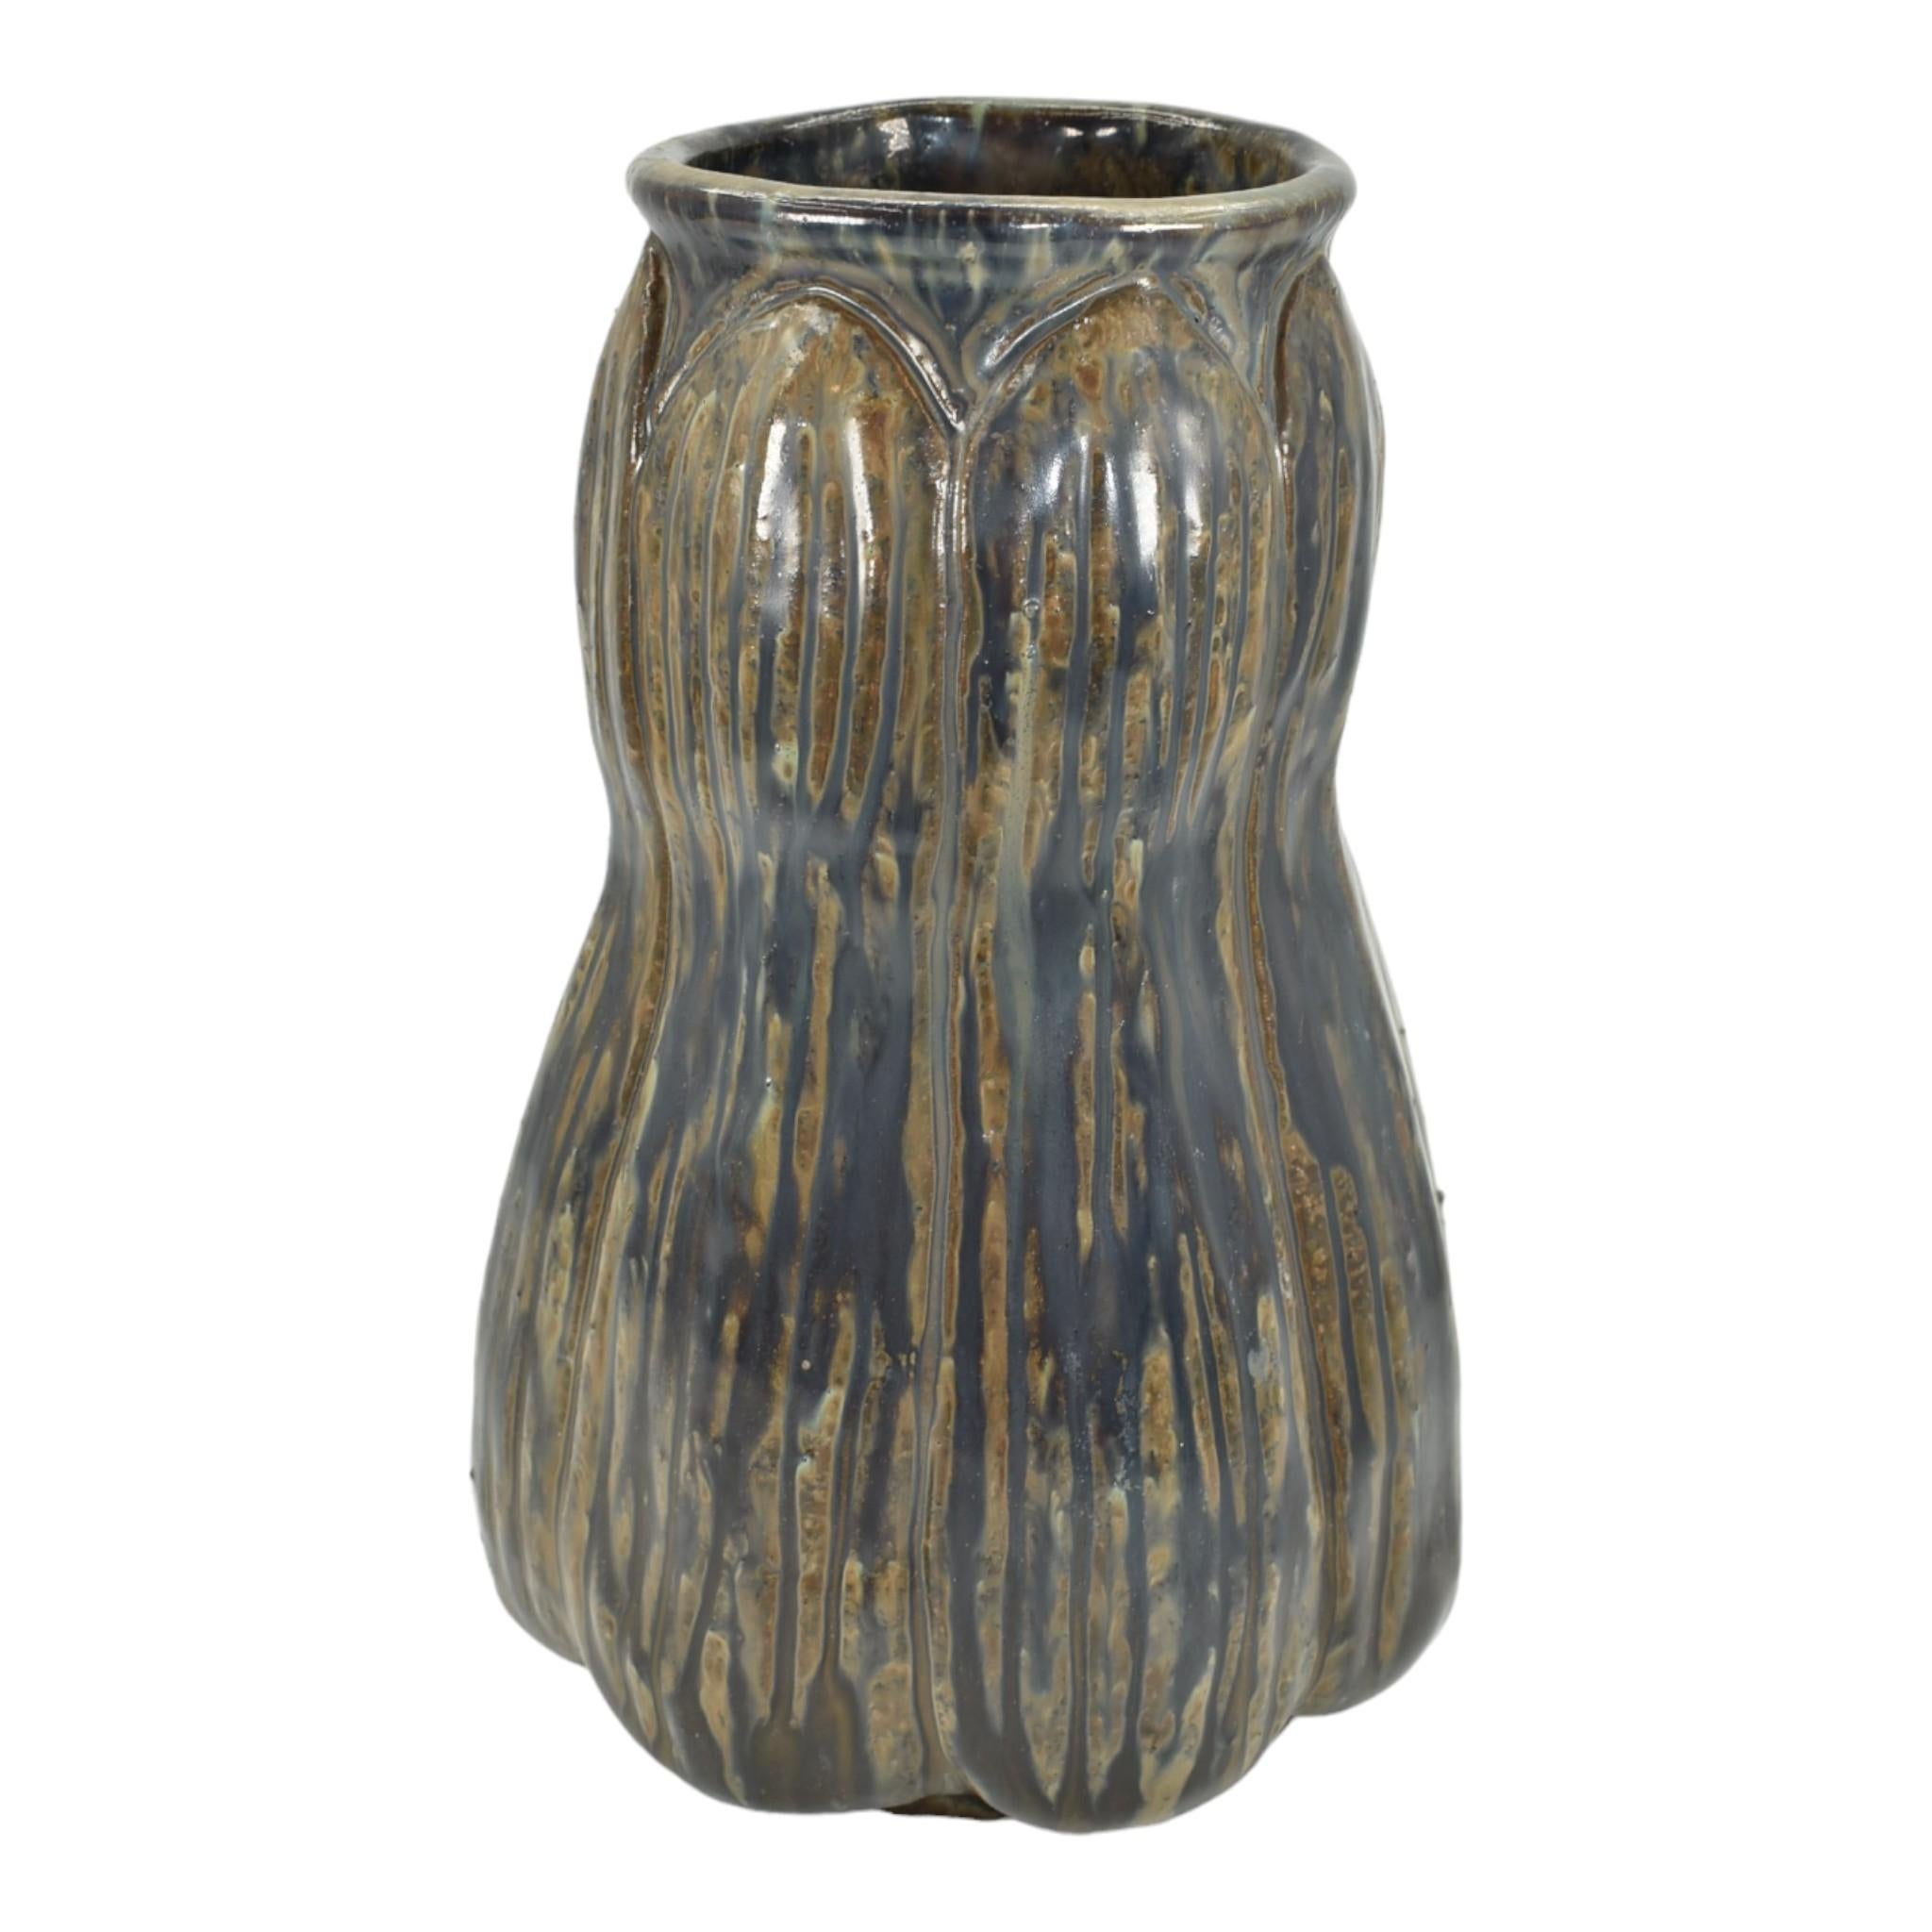 Alexandre Bigot French Vintage Art Nouveau Pottery Brown And Gray Ceramic Vase
Rare and stunning Alexandre Bigot French art nouveau vase with a stunning flowing iridescent luster glaze.
Excellent condition. Small glaze nick to base edge and minor,